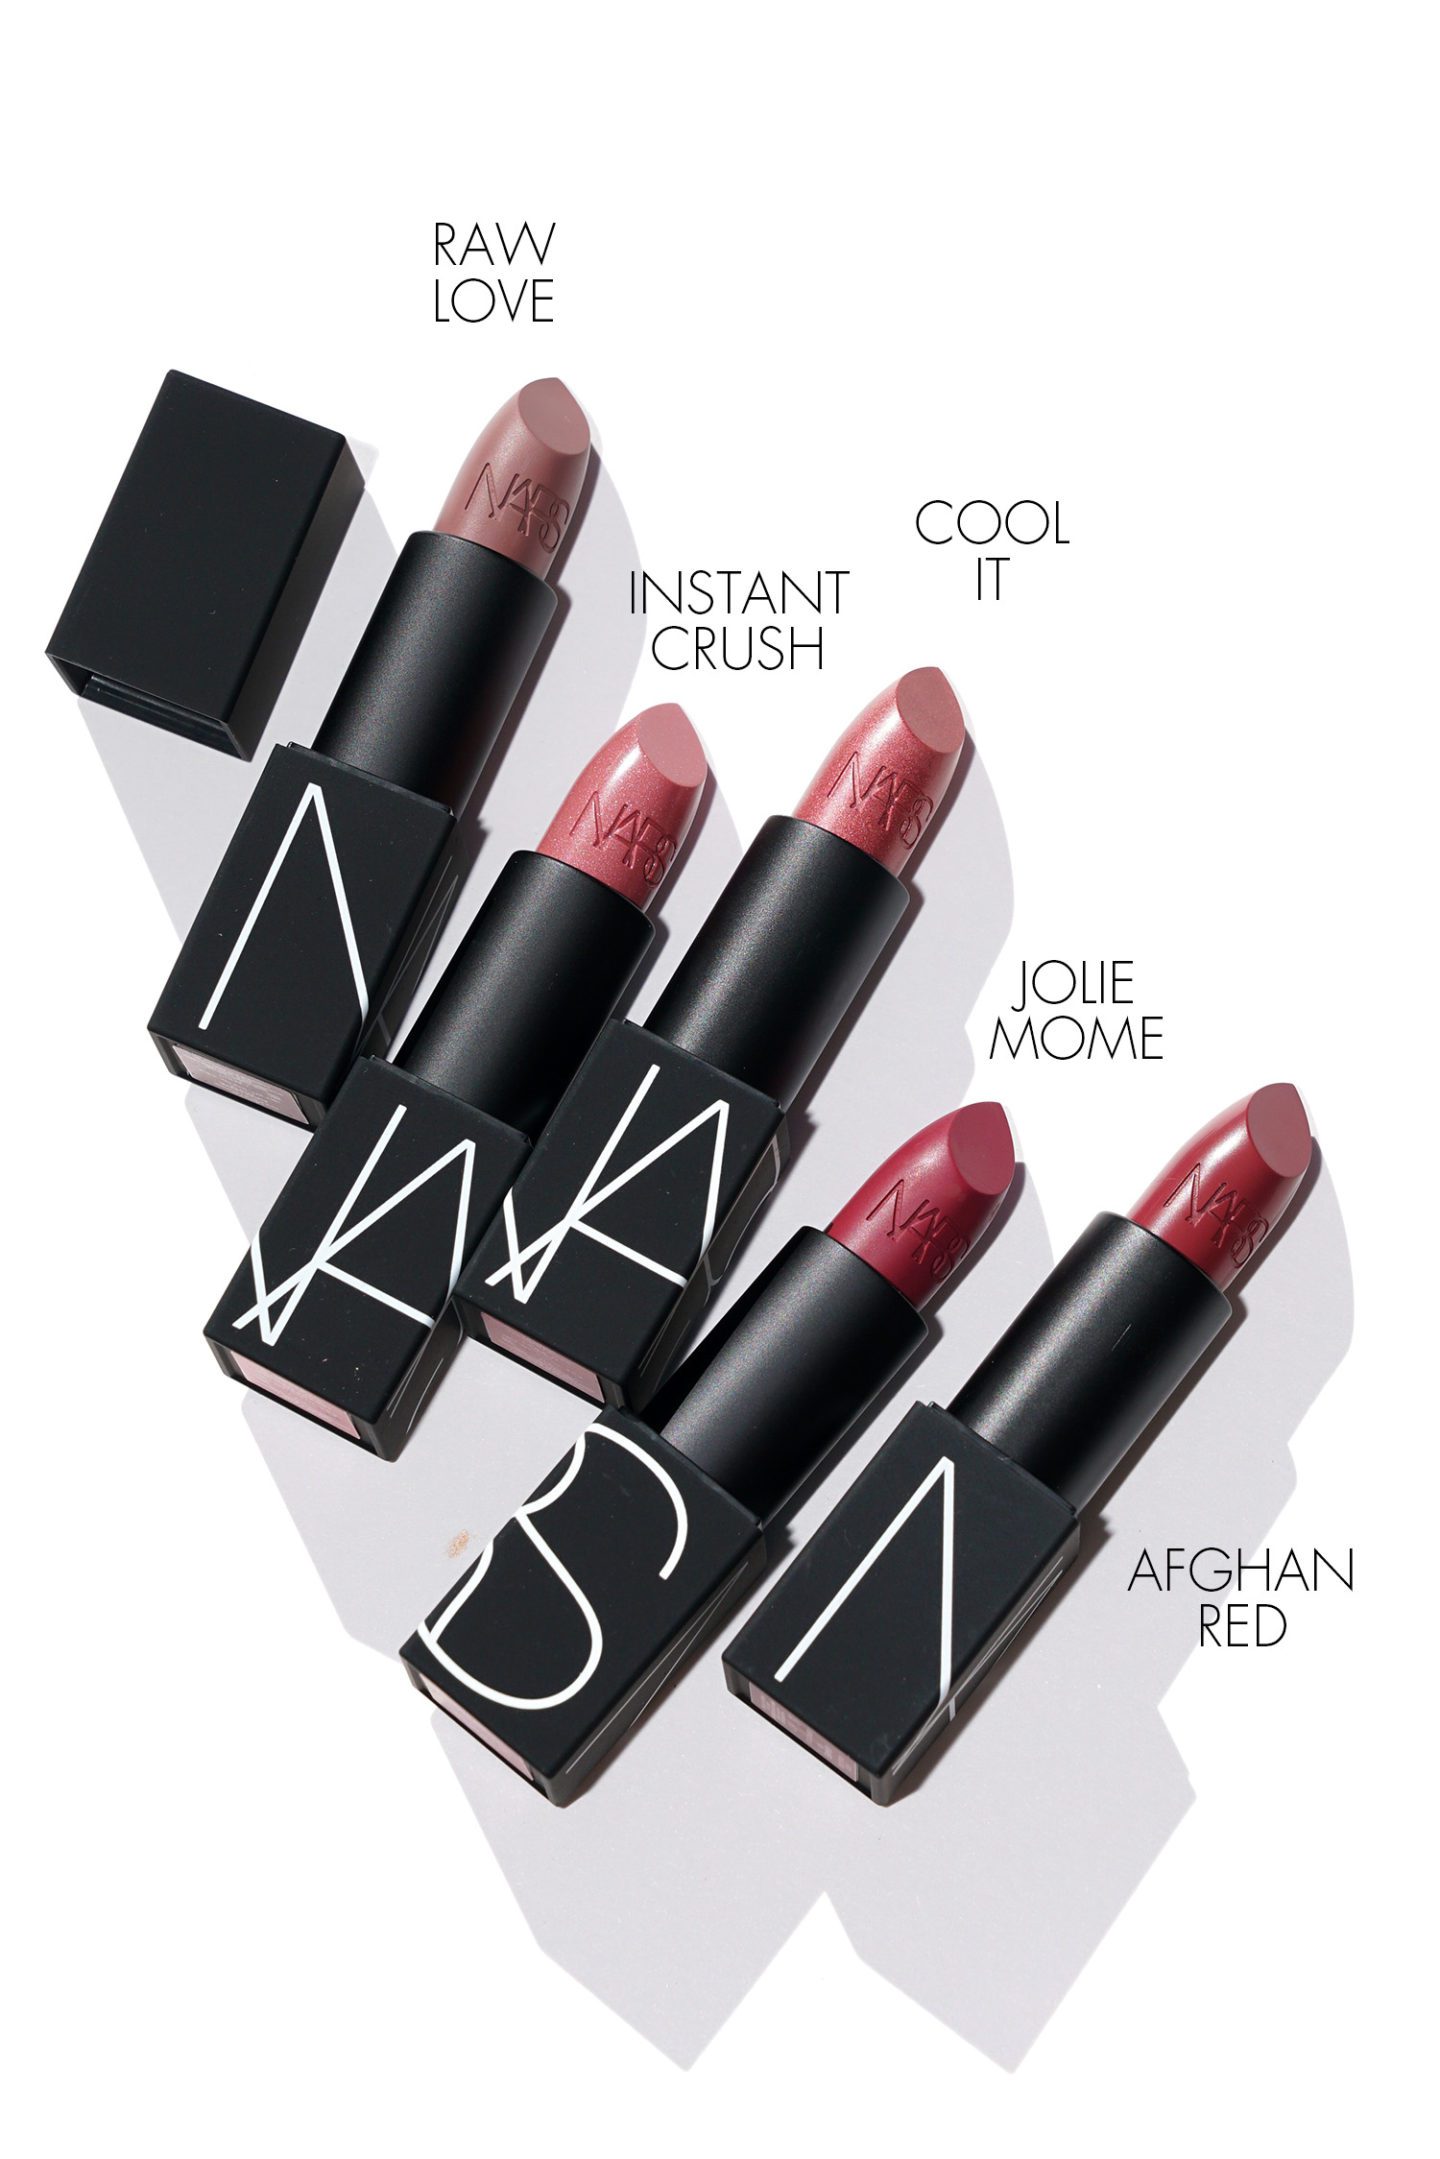 NARS Lipstick Raw Love, Instant Crush, Cool It, Jolie Mome, Afghan Red